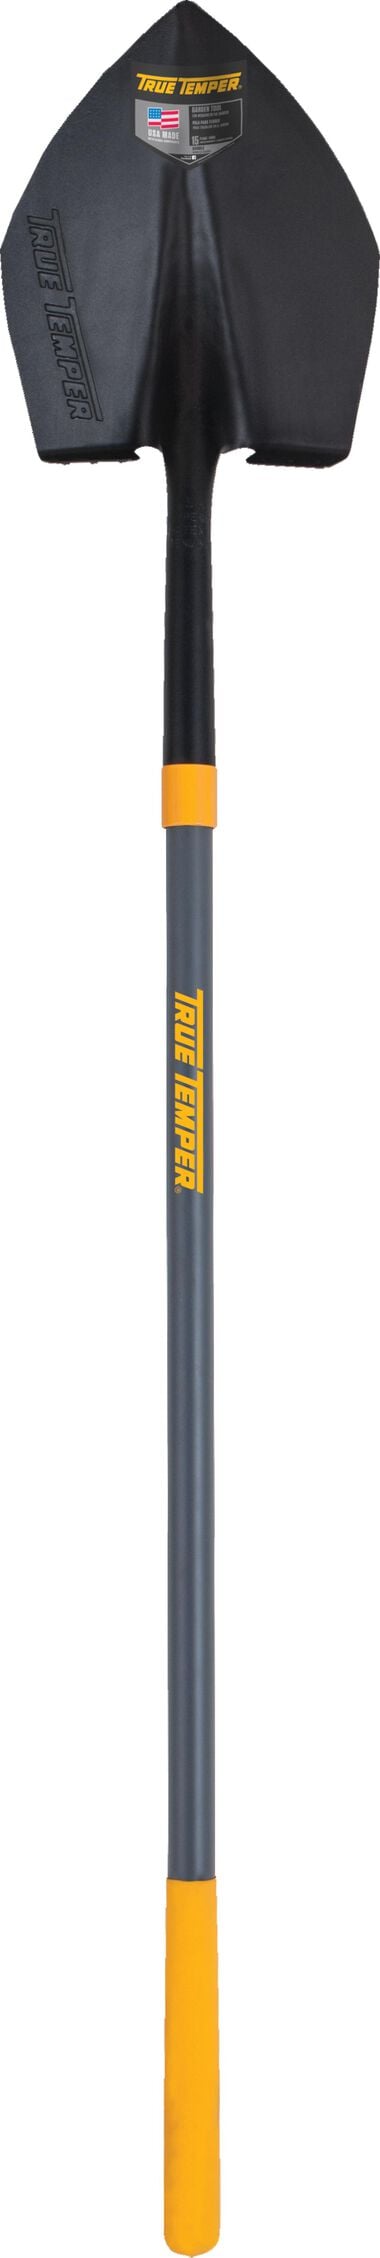 True Temper Excavator Shovel Forged Round Point with Comfort Step & Cushion End Grip on Fiberglass Handle